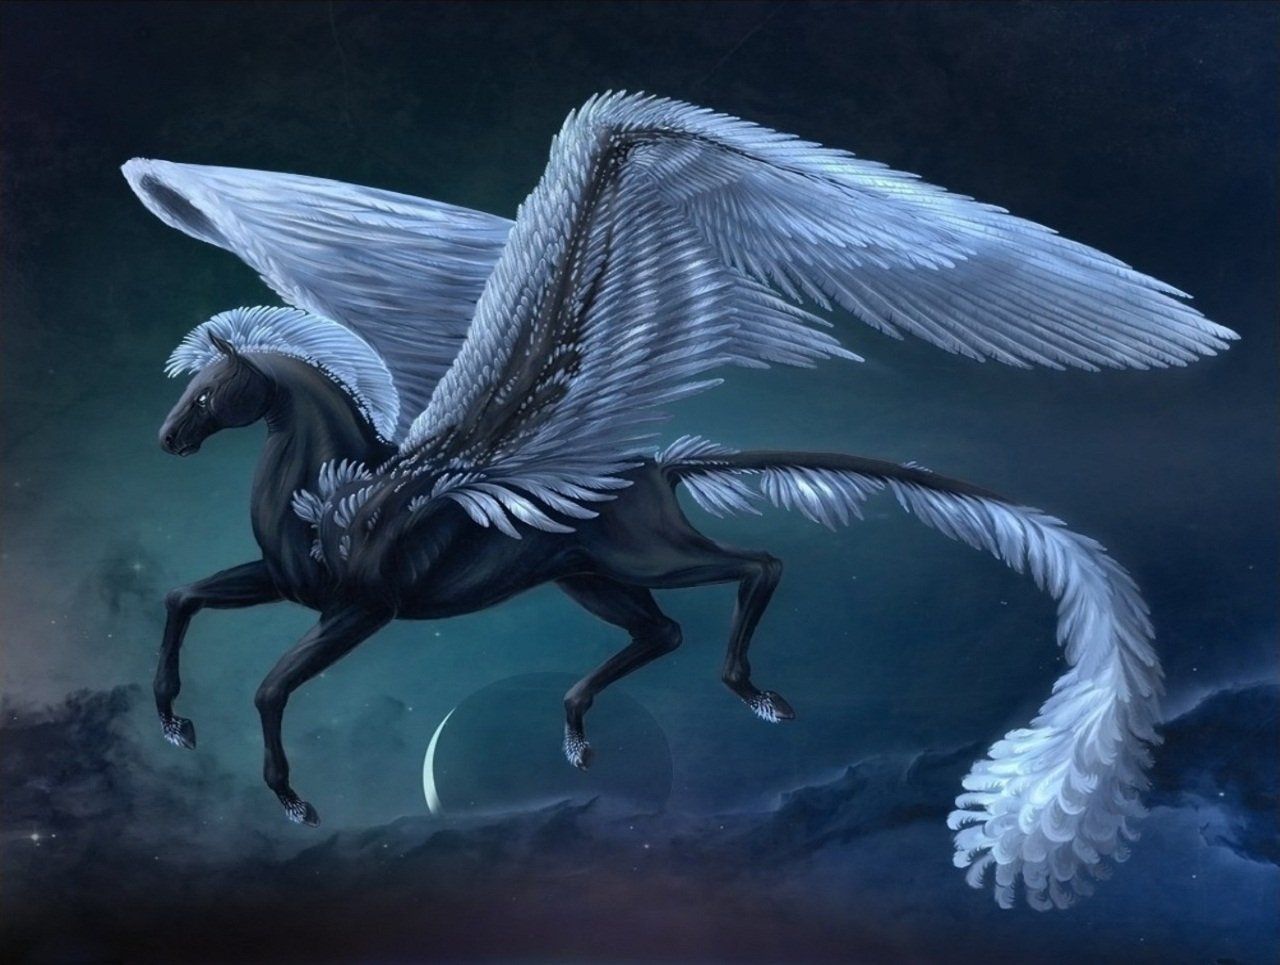 Magical Mythical Creature Wallpaper and Background Imagex965